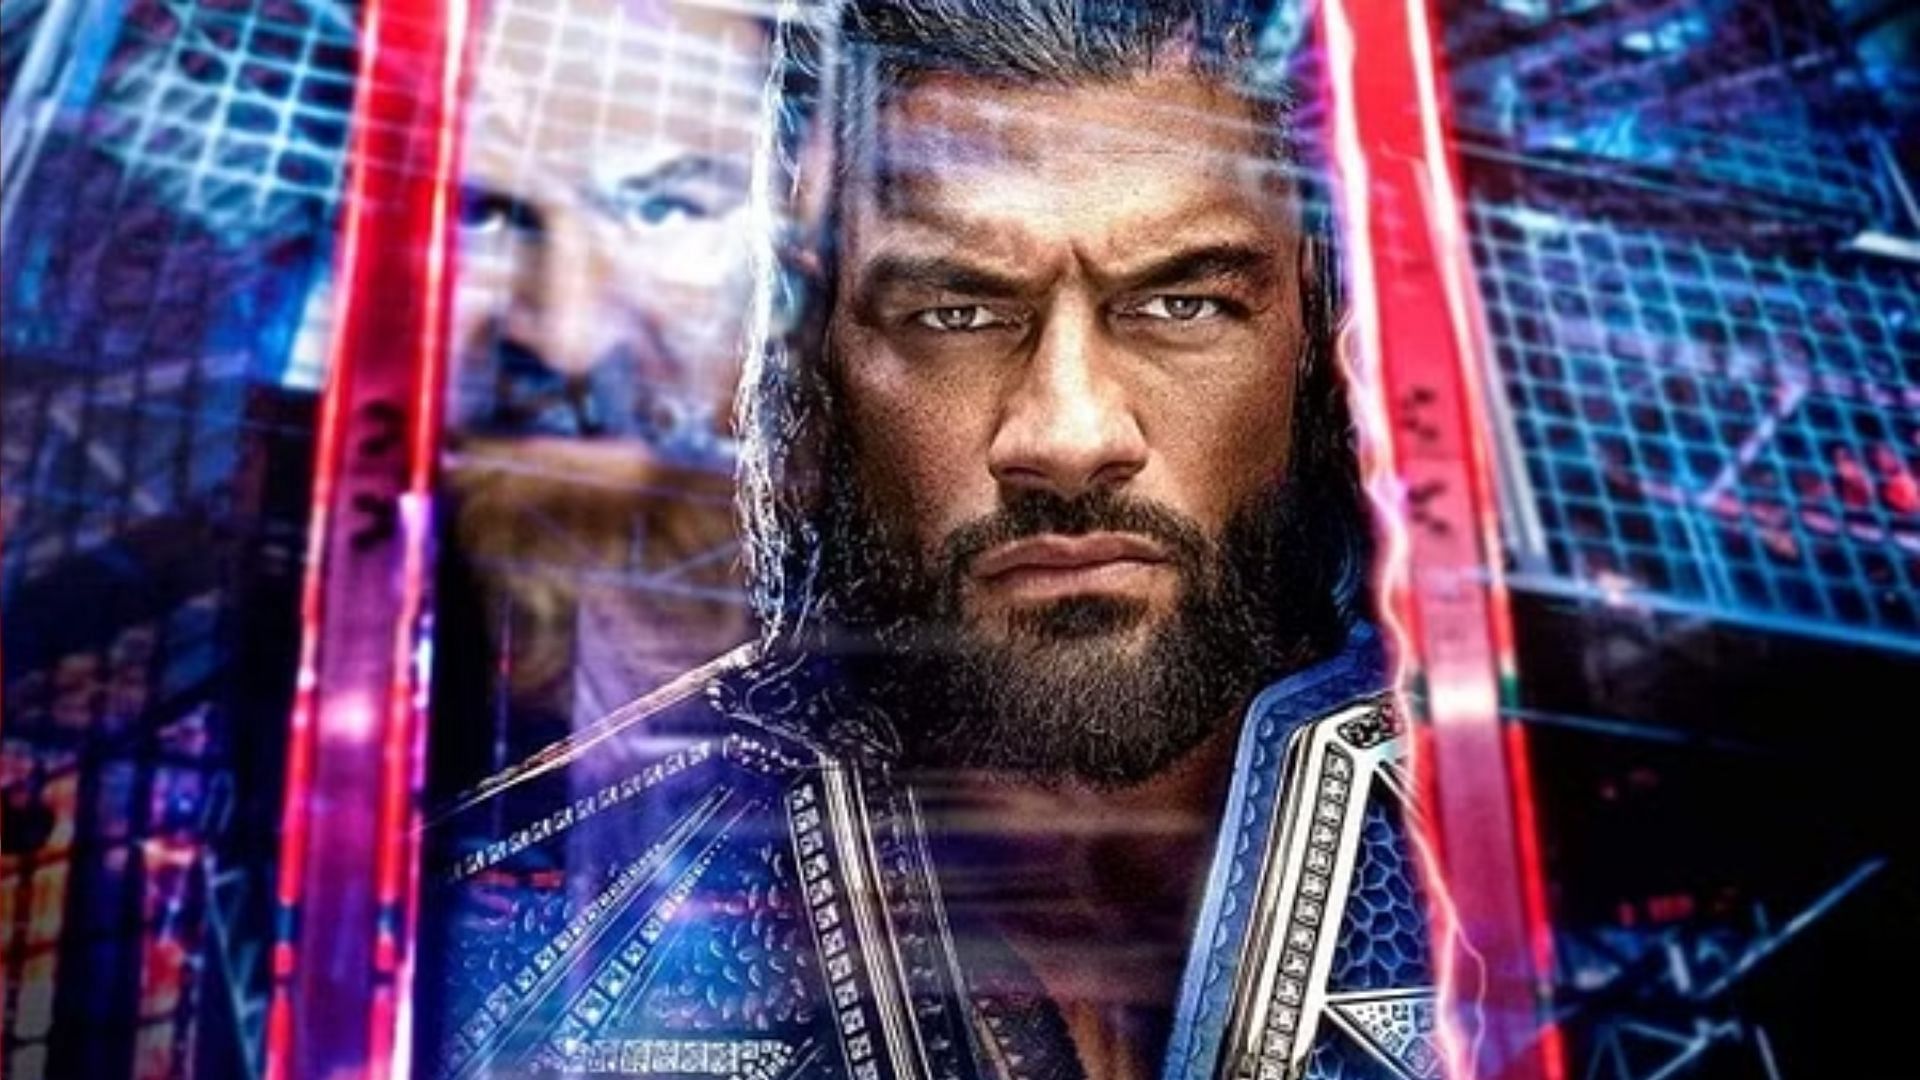 WWE Elimination Chamber poster featuring Roman Reigns and Sami Zayn